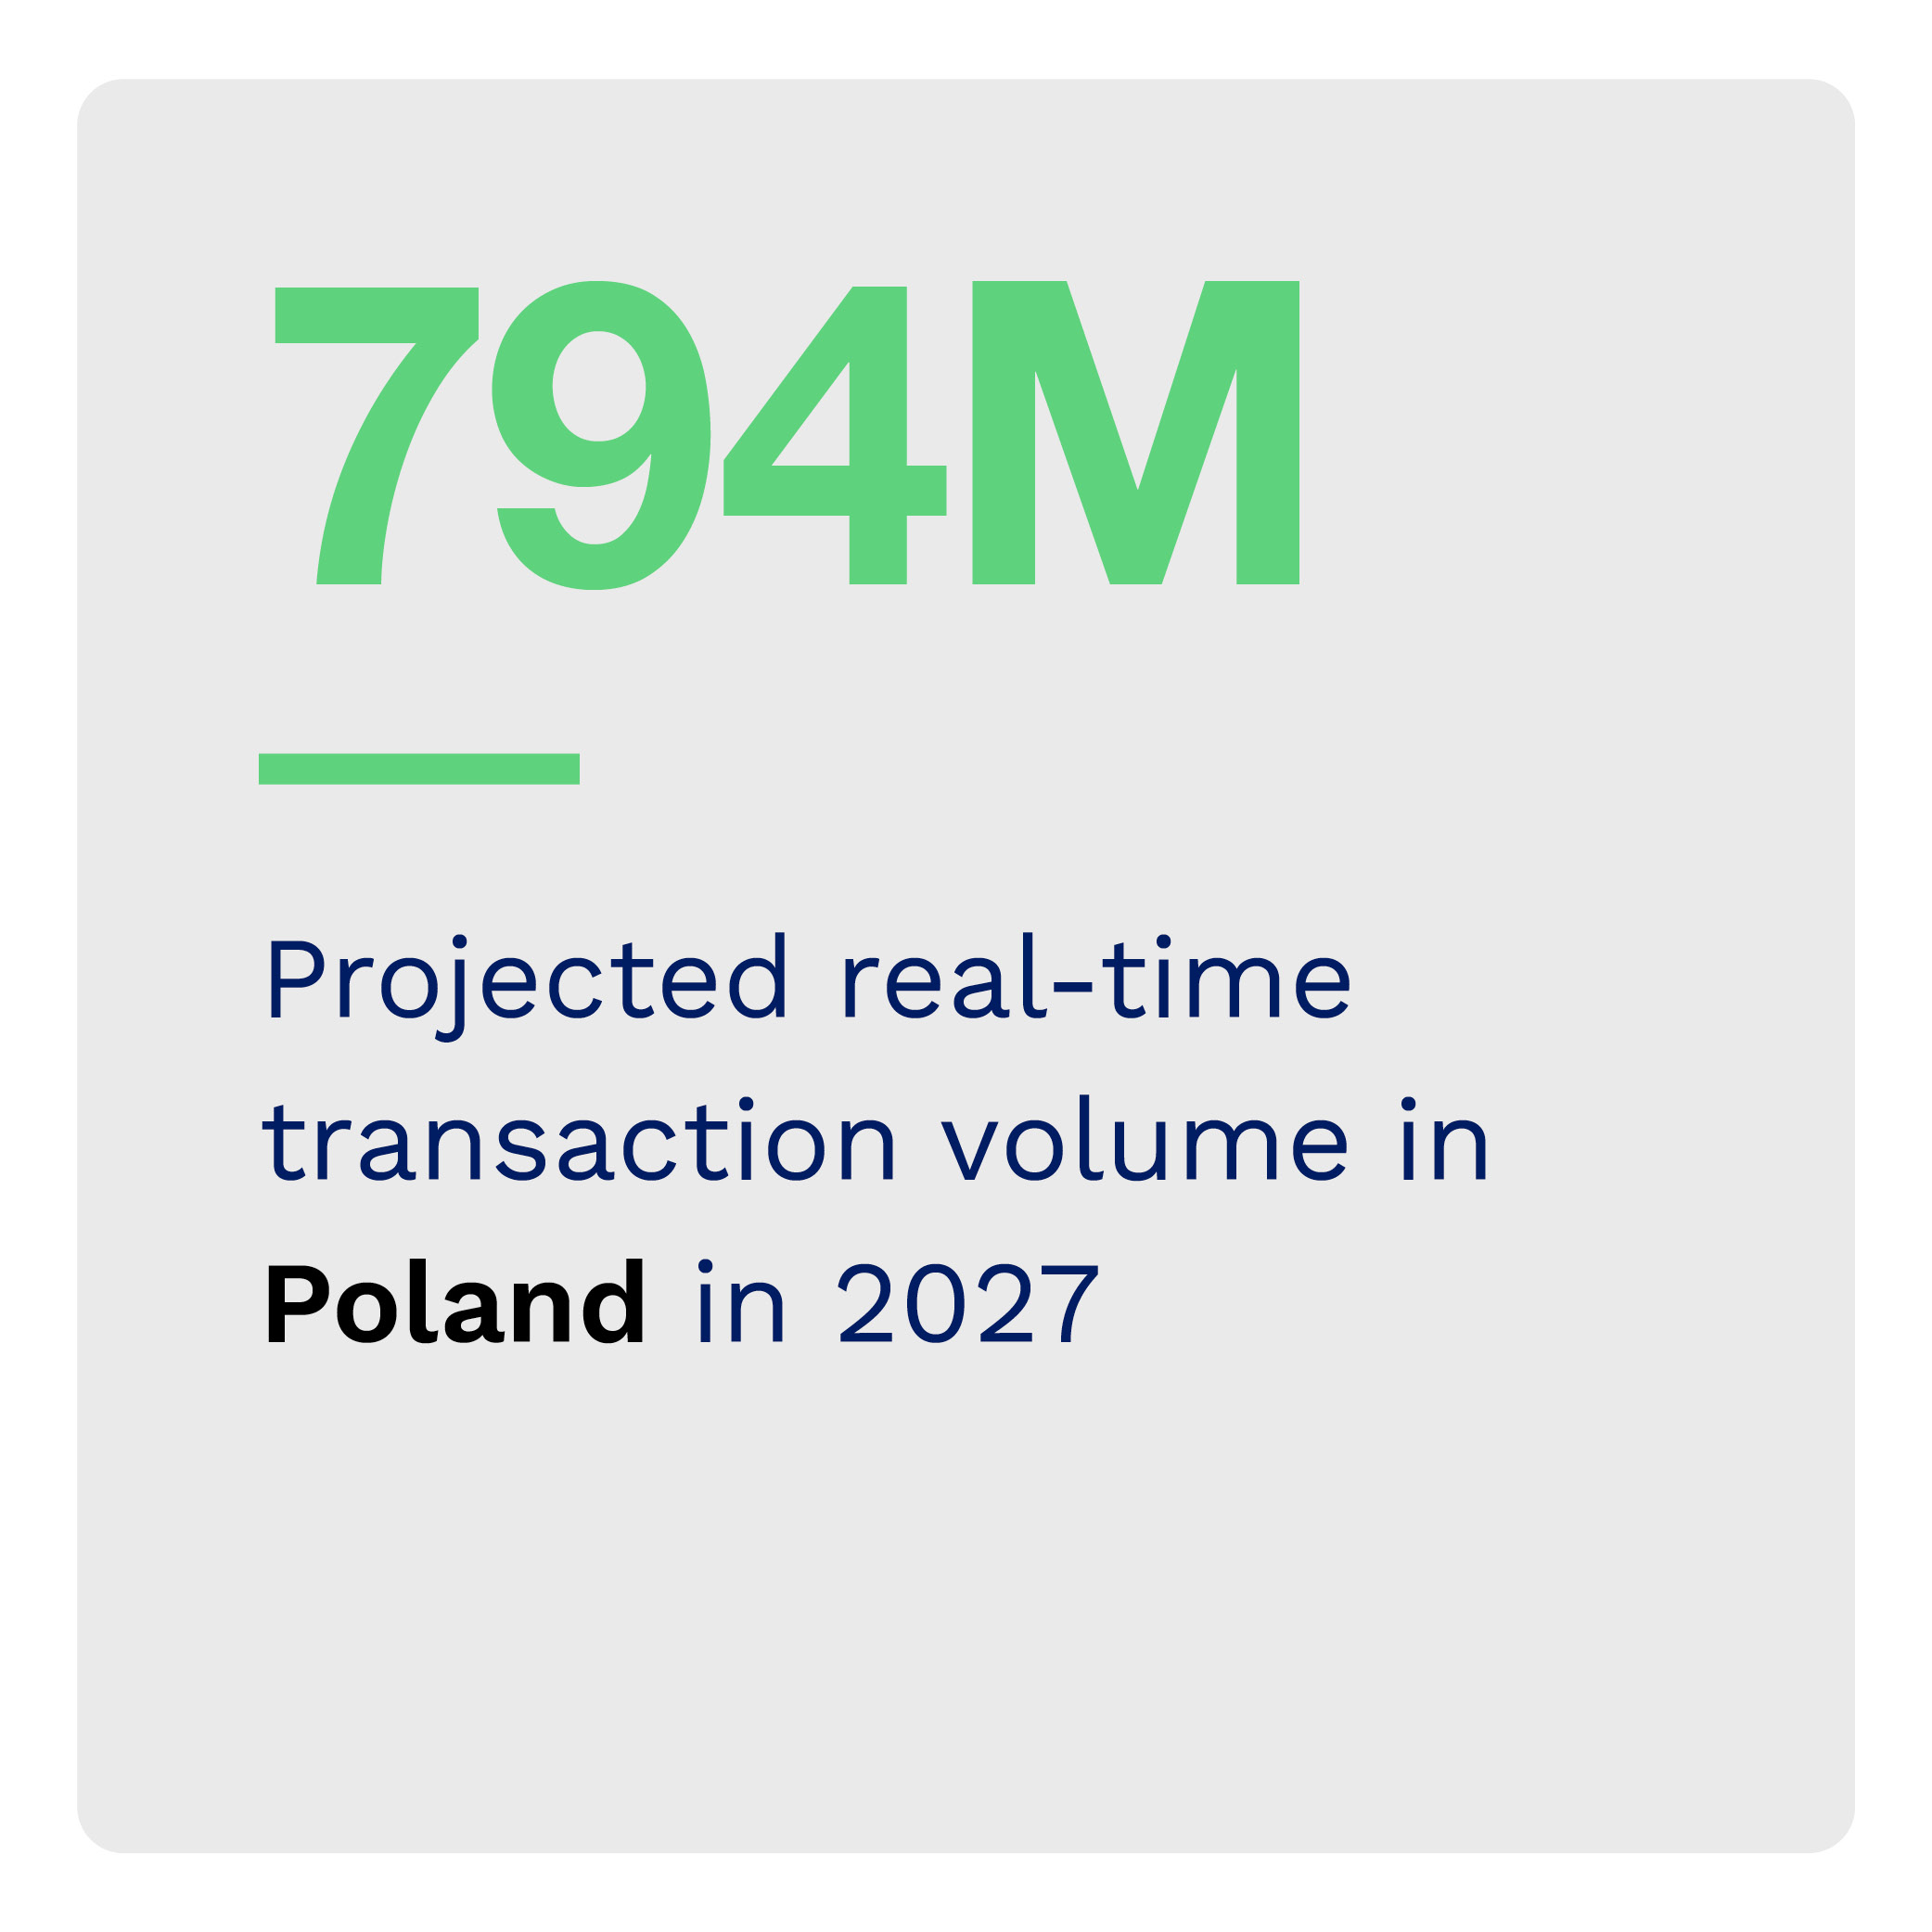 794M: Projected real-time transaction volume in Poland in 2027